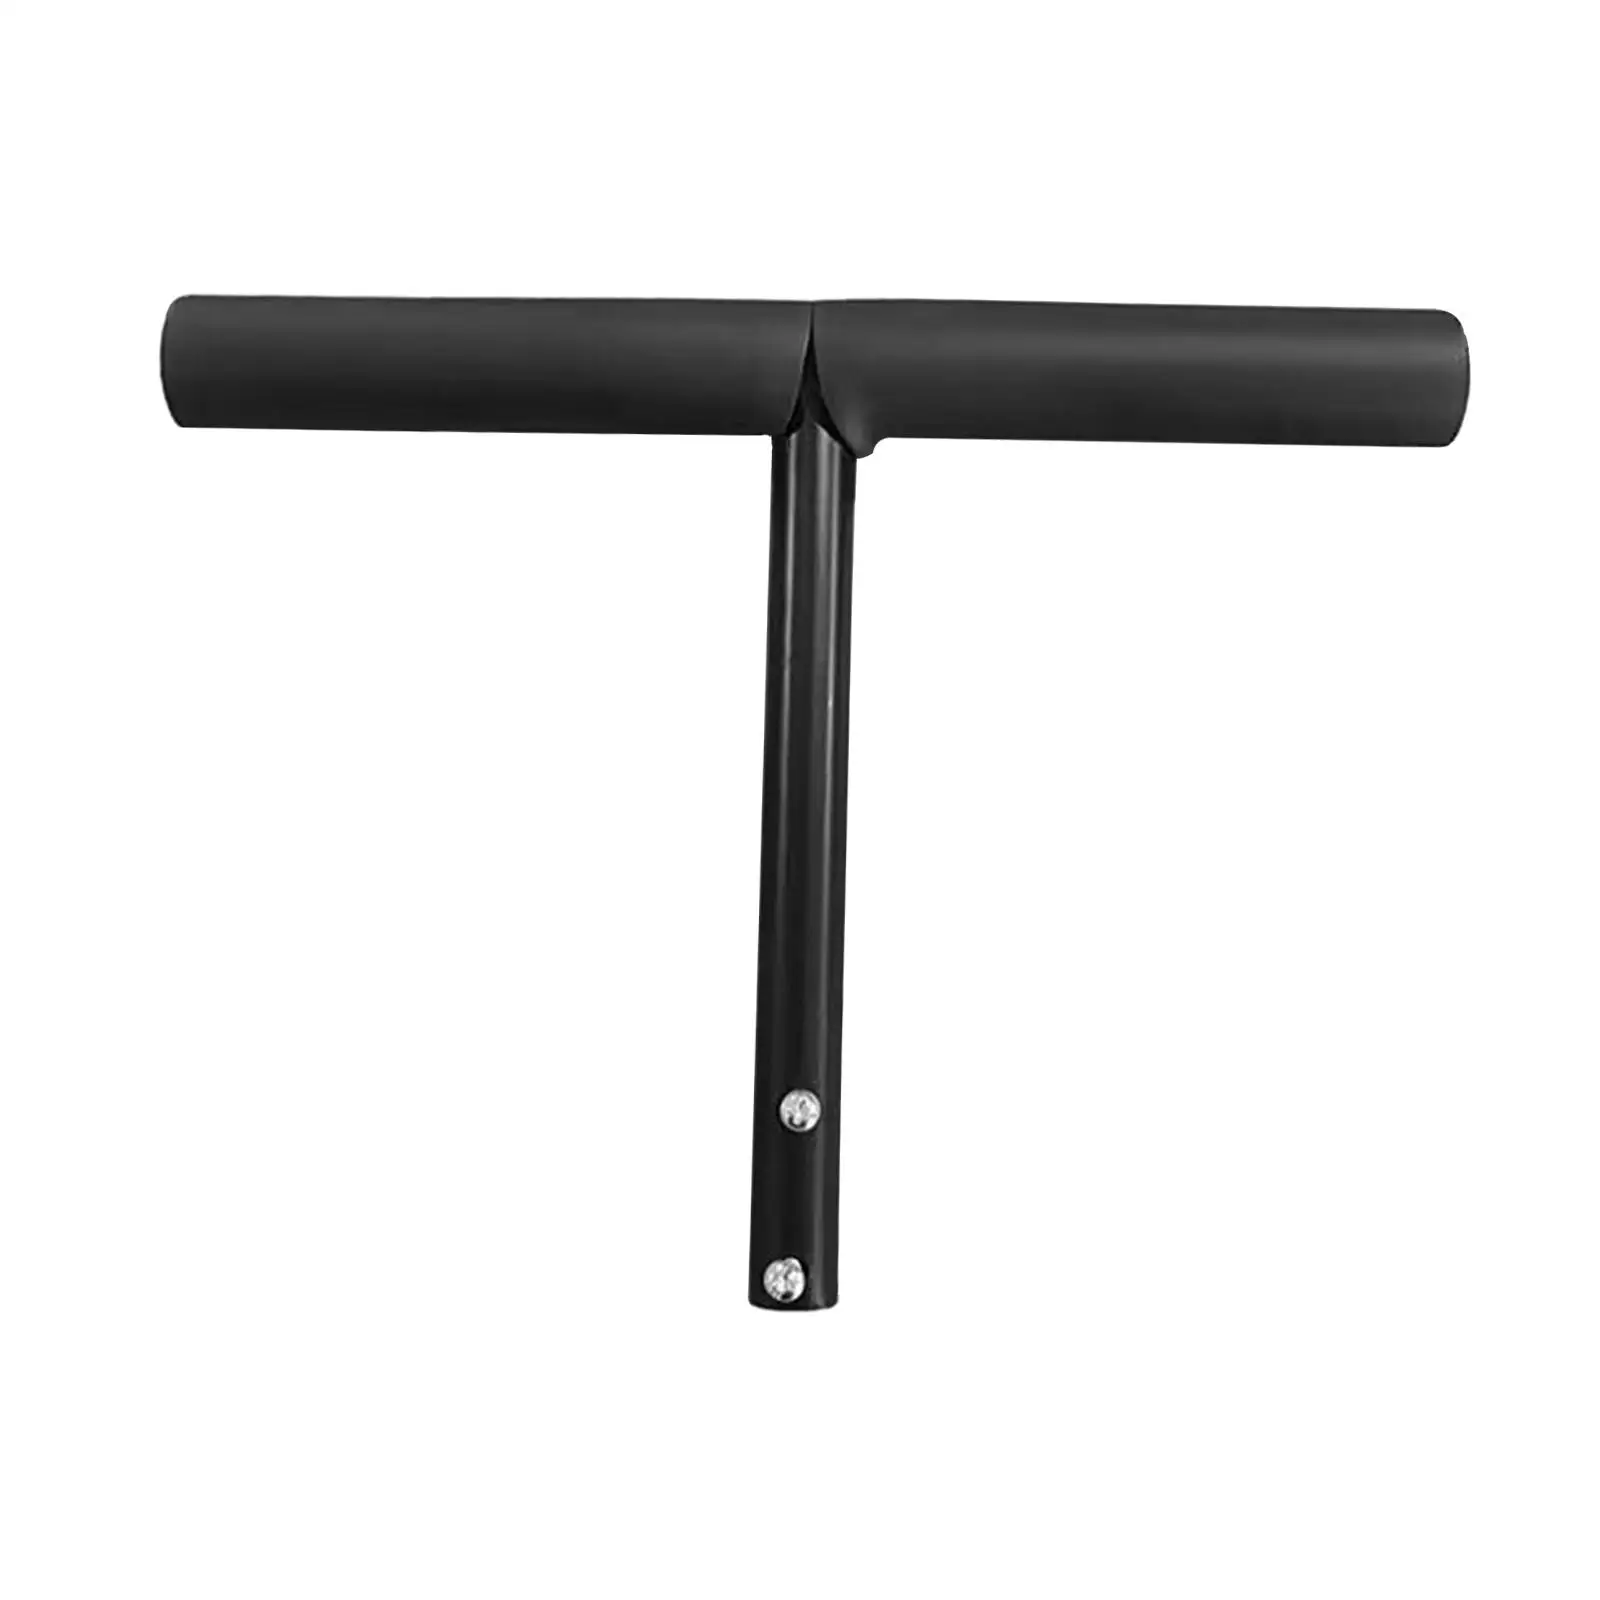 T Shaped Push Handle Bar Kids Tricycle Accessories Baby Bike Accessory Replacement Parts Durable for Home Outdoor Travel